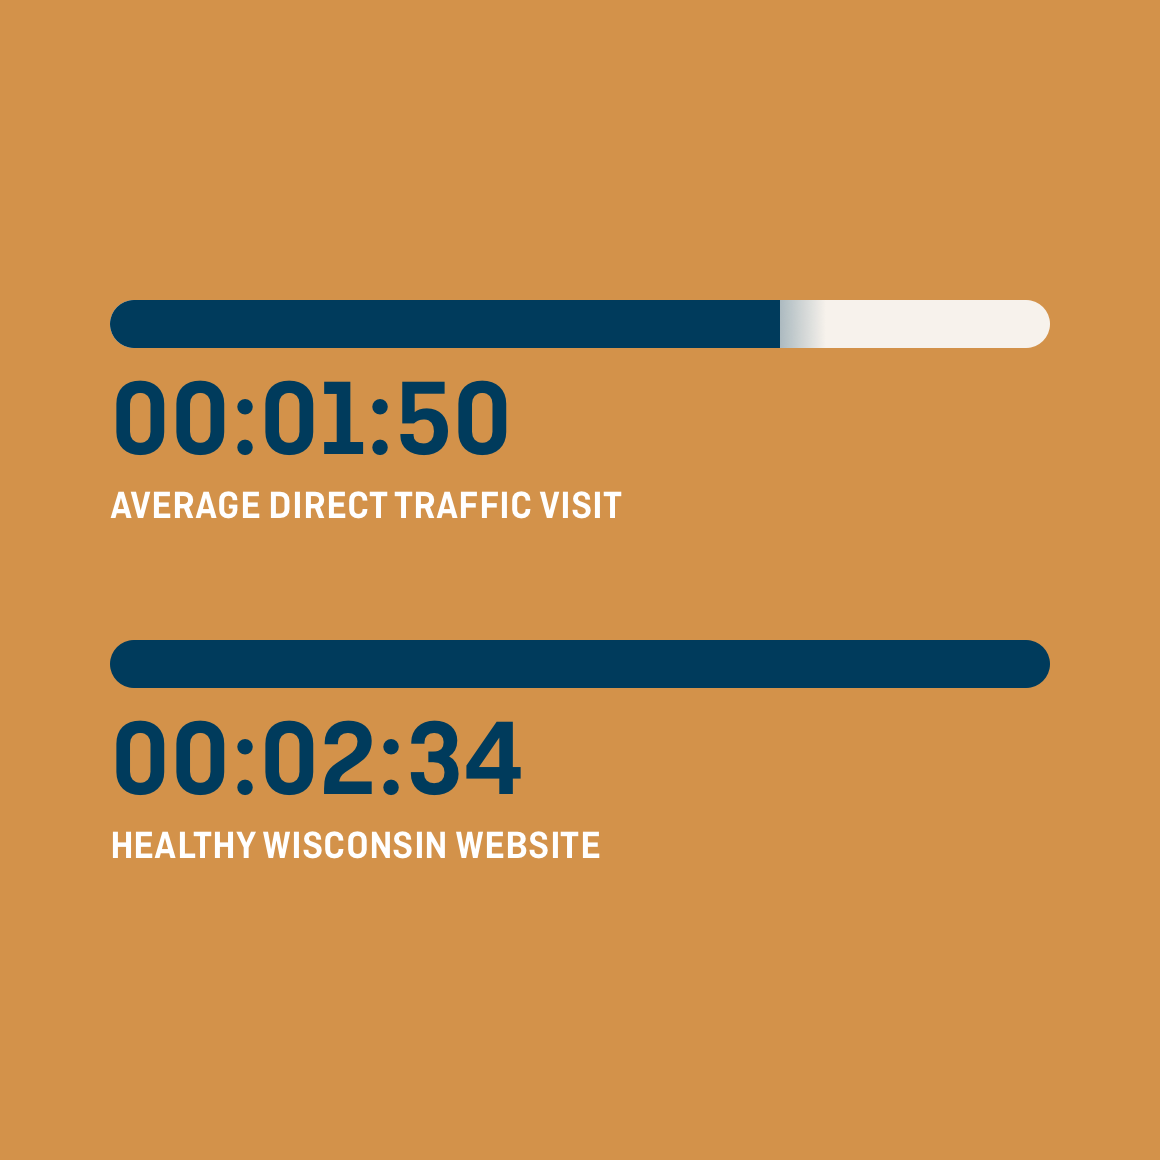 Graphic showing average direct traffic visit is 1 minute 50 seconds and average website visit is 2 minutes 34 seconds